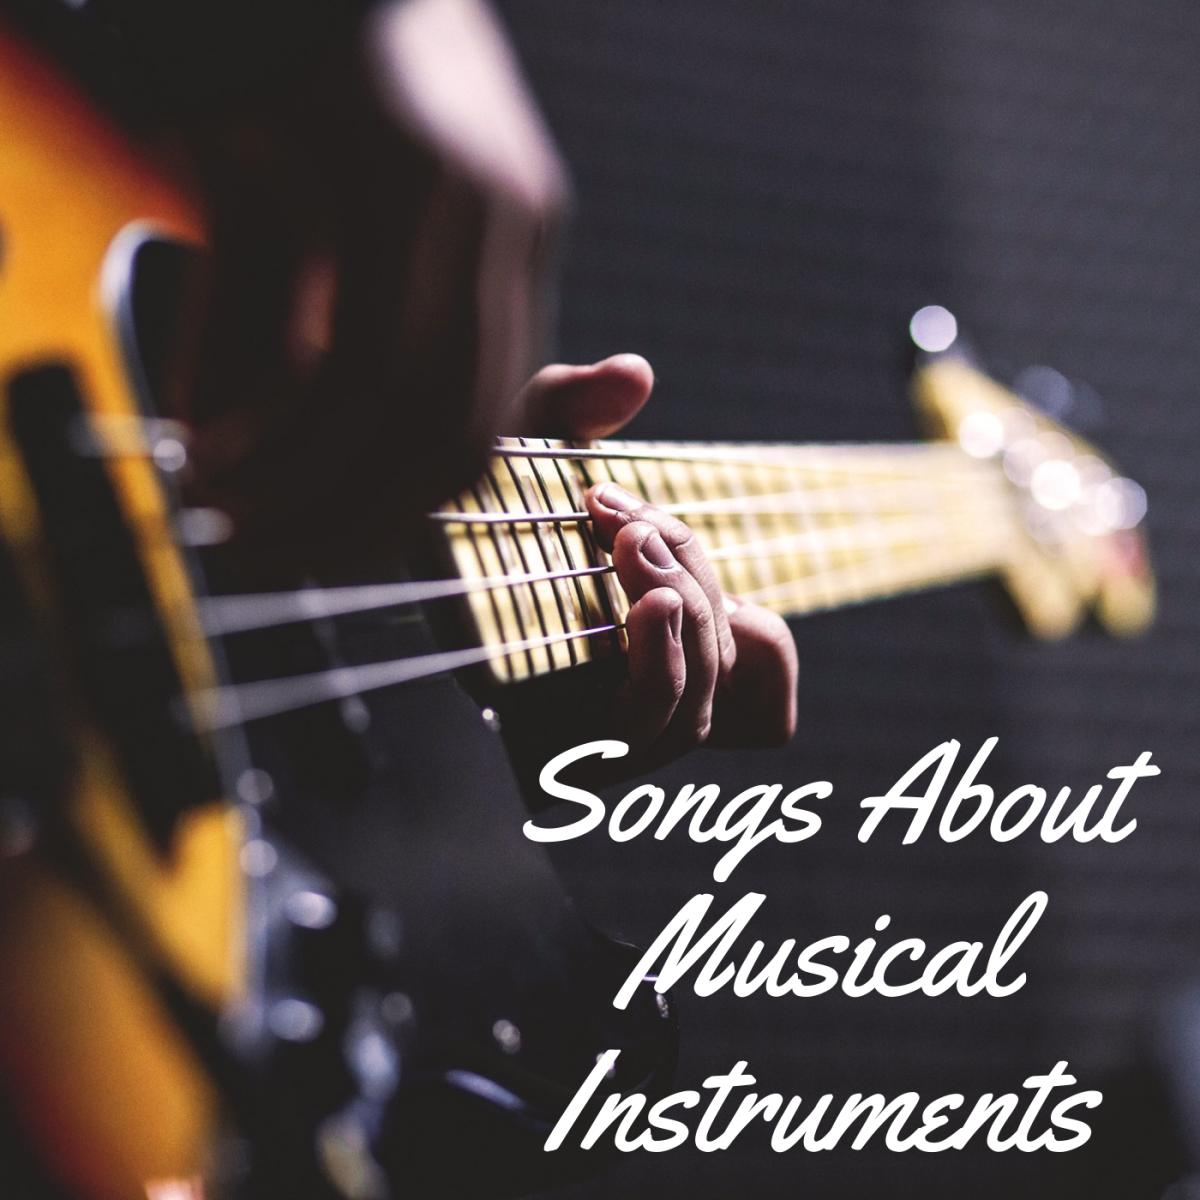 Celebrate drums, pianos, guitars, and other musical instruments with this playlist of pop, rock, and country songs. Where would we be without the ability to strum a few chords?